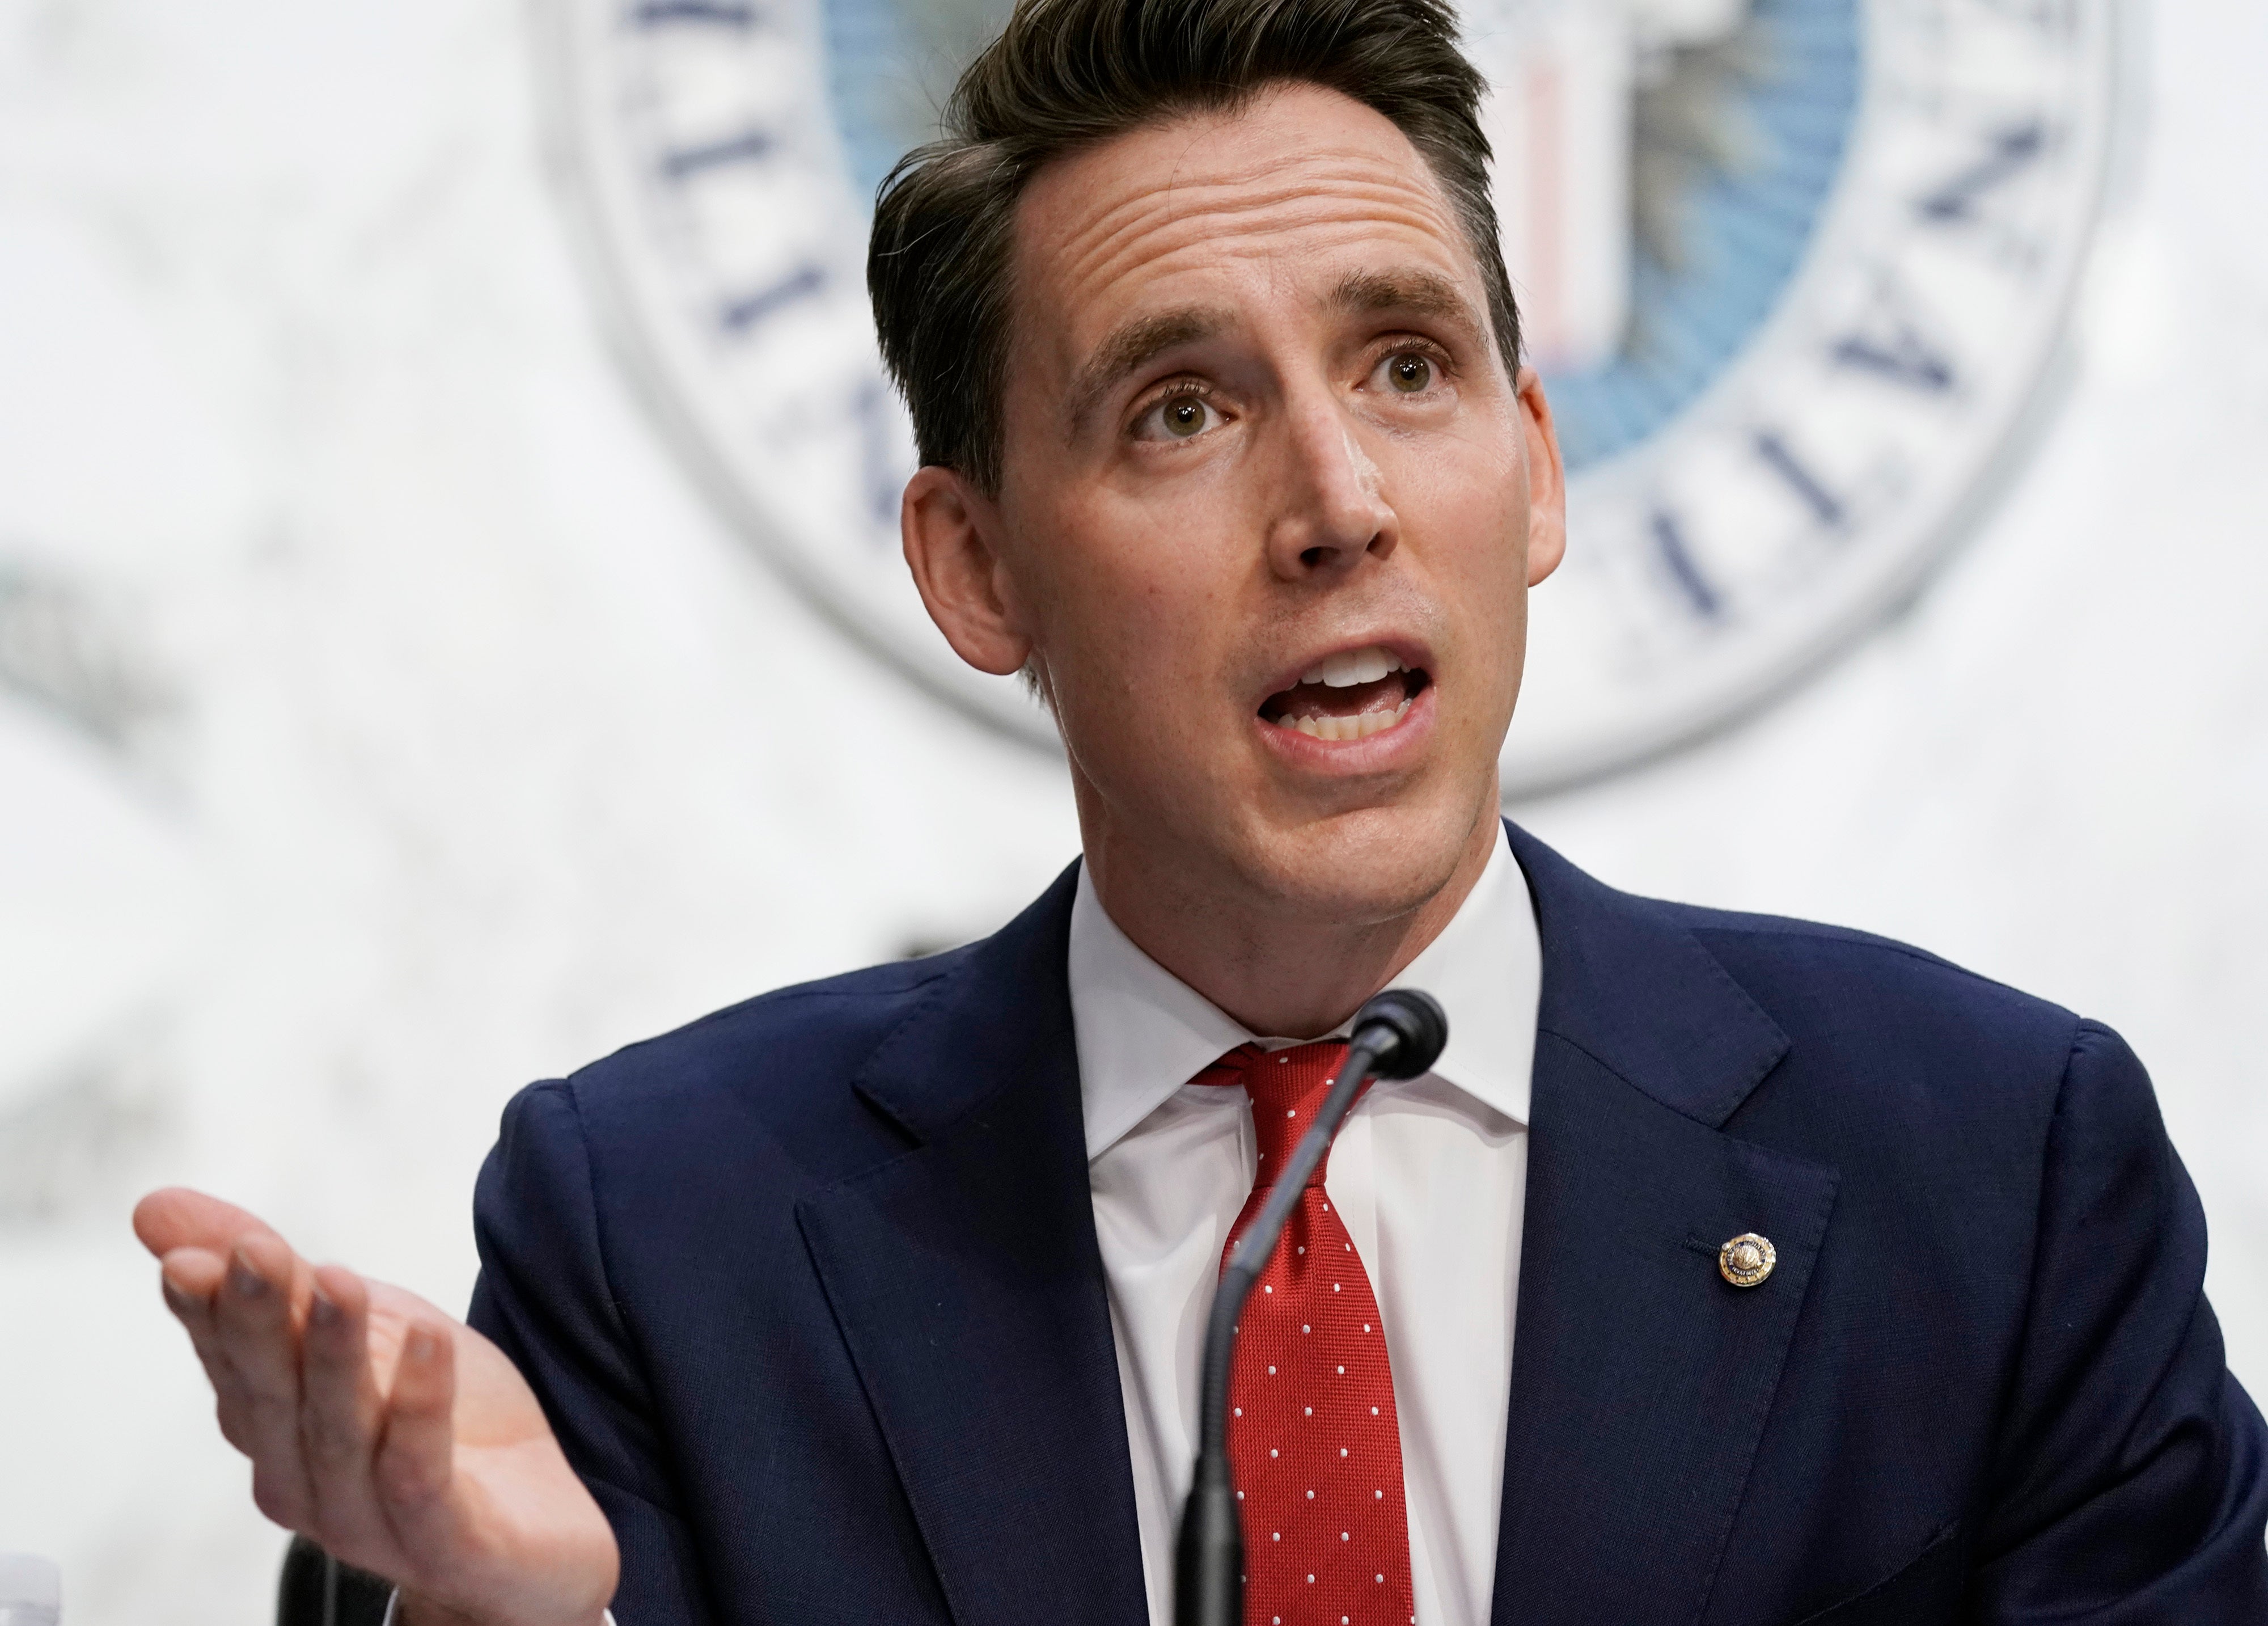 Sen Josh Hawley helped to urge the crowd to attack the US Capitol on January 6, an expert says